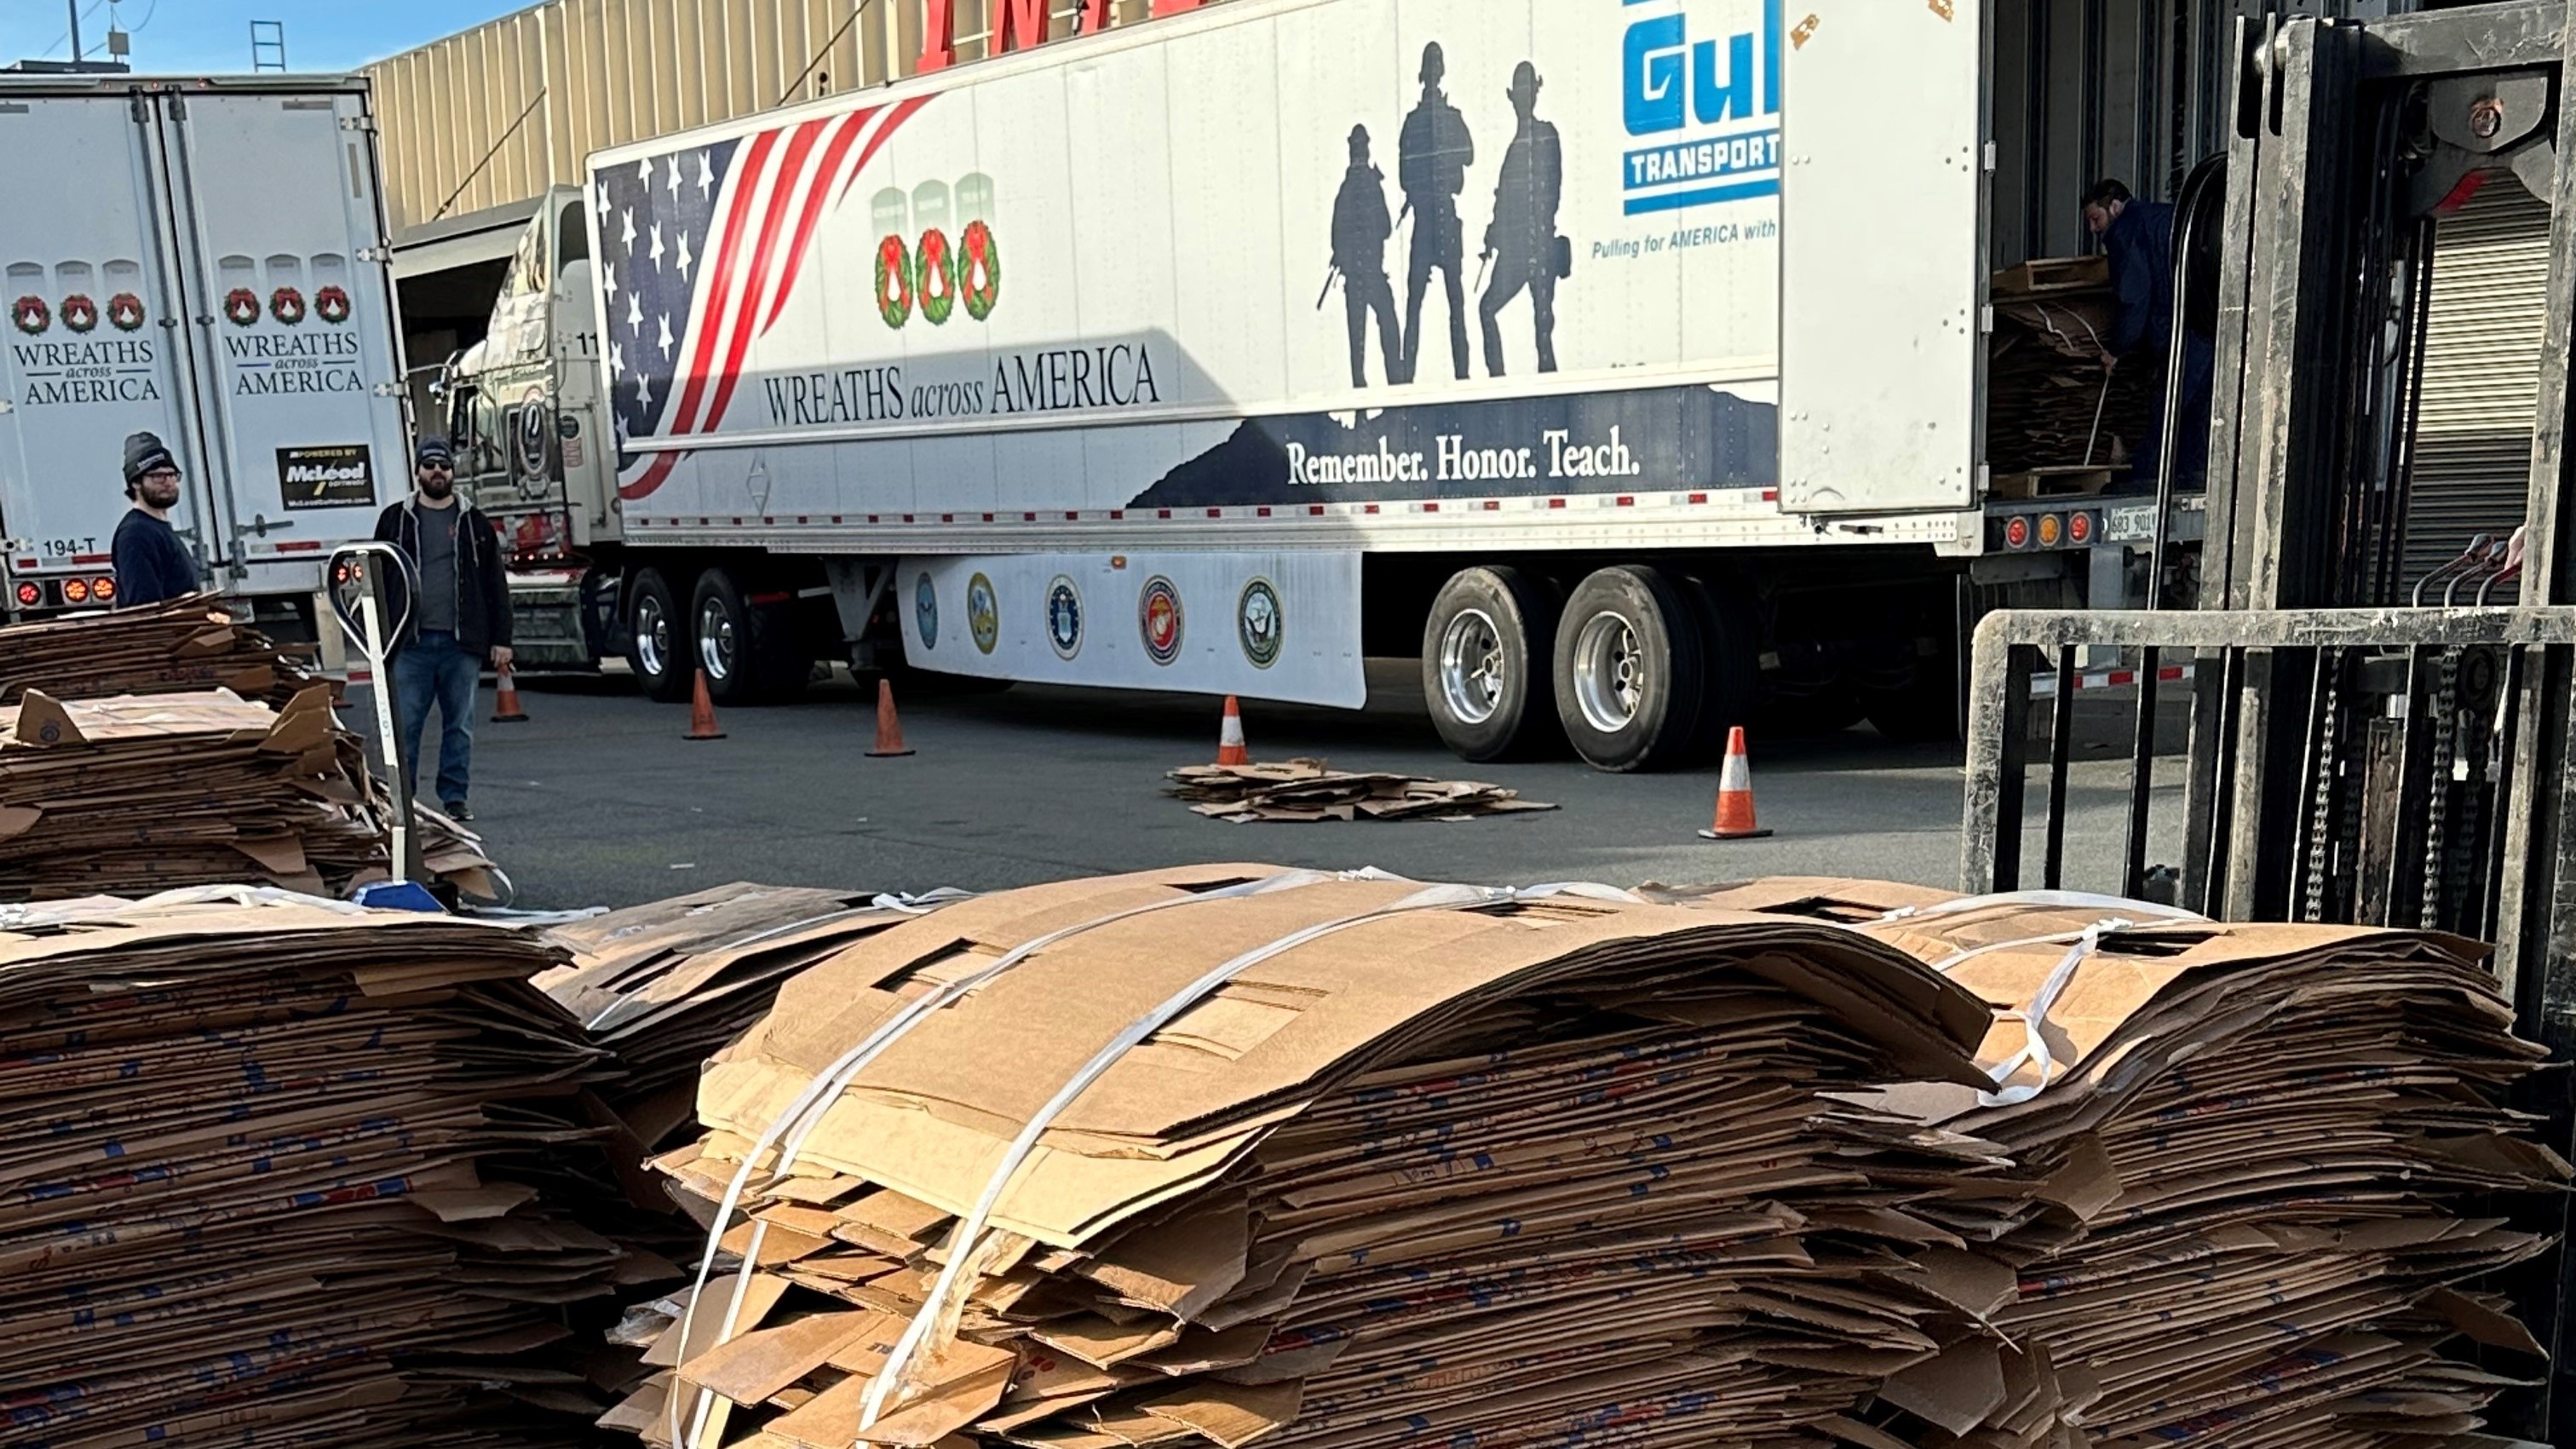 Bundles of recyclable Wreaths Across America materials recovered by International Paper on National Wreaths Across America Day at Arlington National Cemetery.